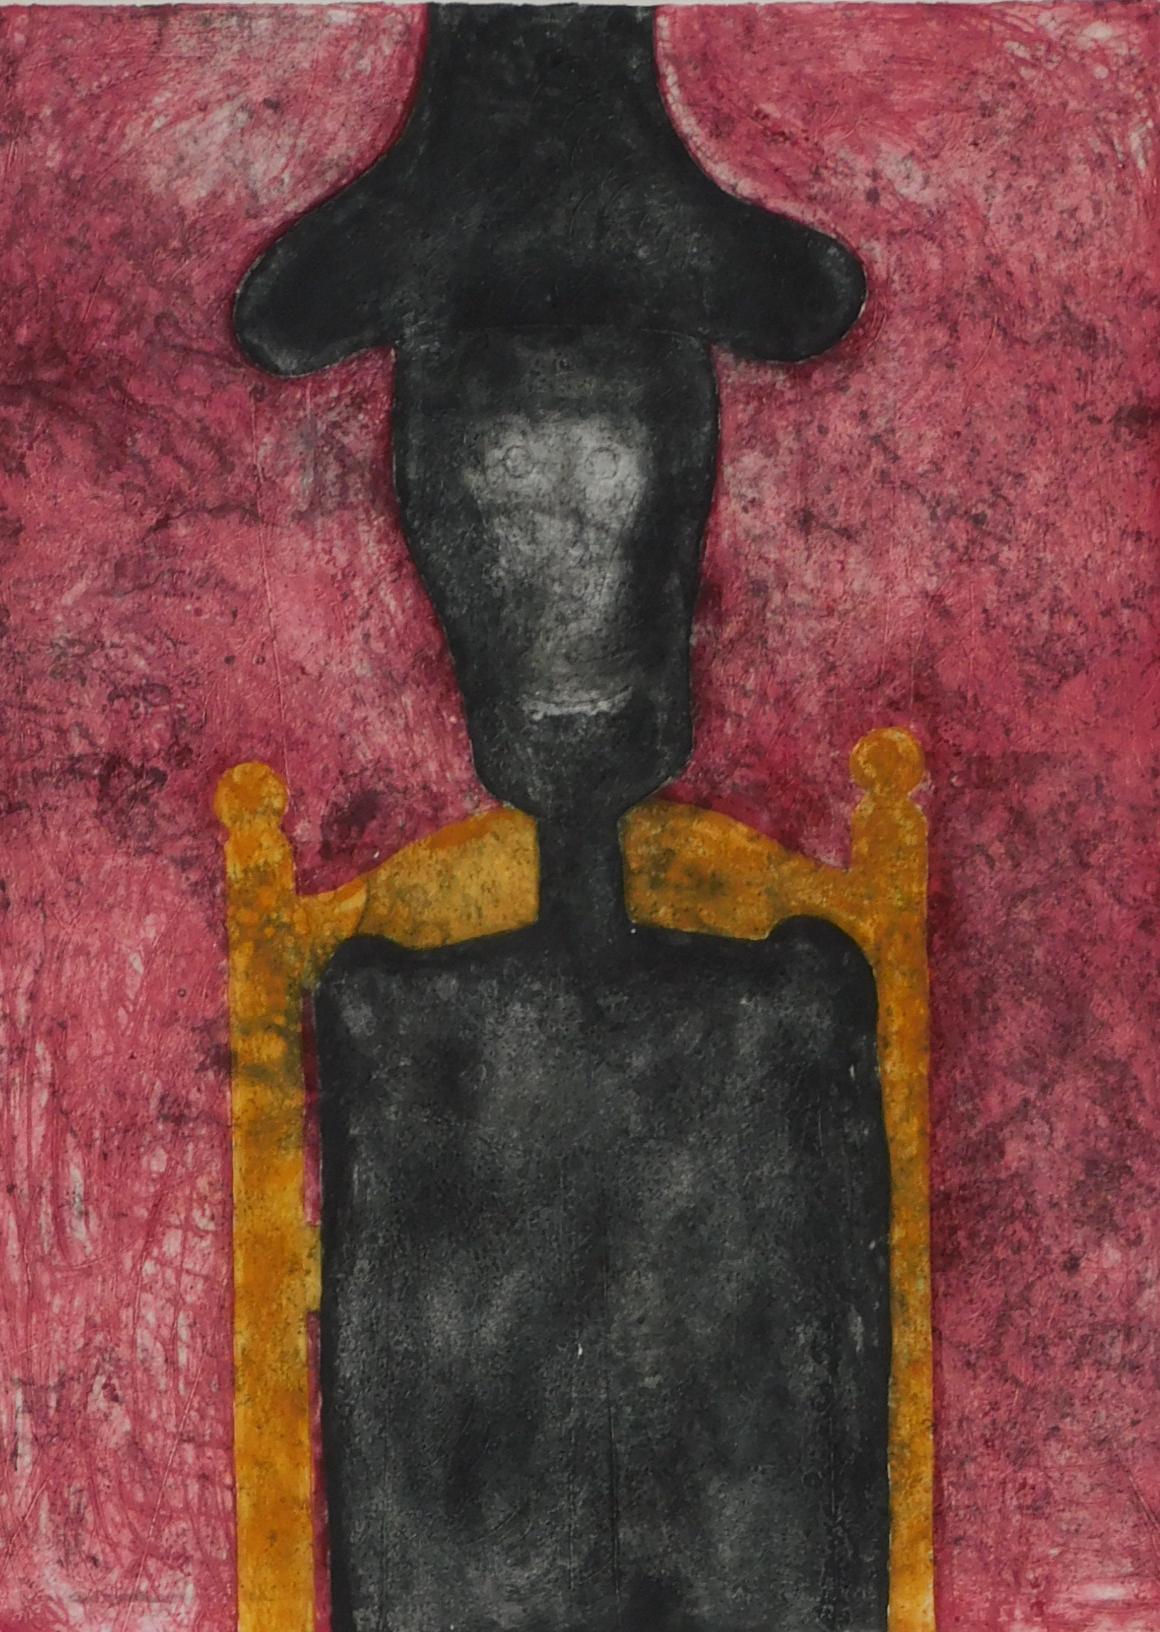 Mixografia “Man in Black” by well-known Mexico artist Rufino Tamayo (1891-1991).
Signed “R. Tamayo” in pencil lower right. Numbered in pencil “60/140